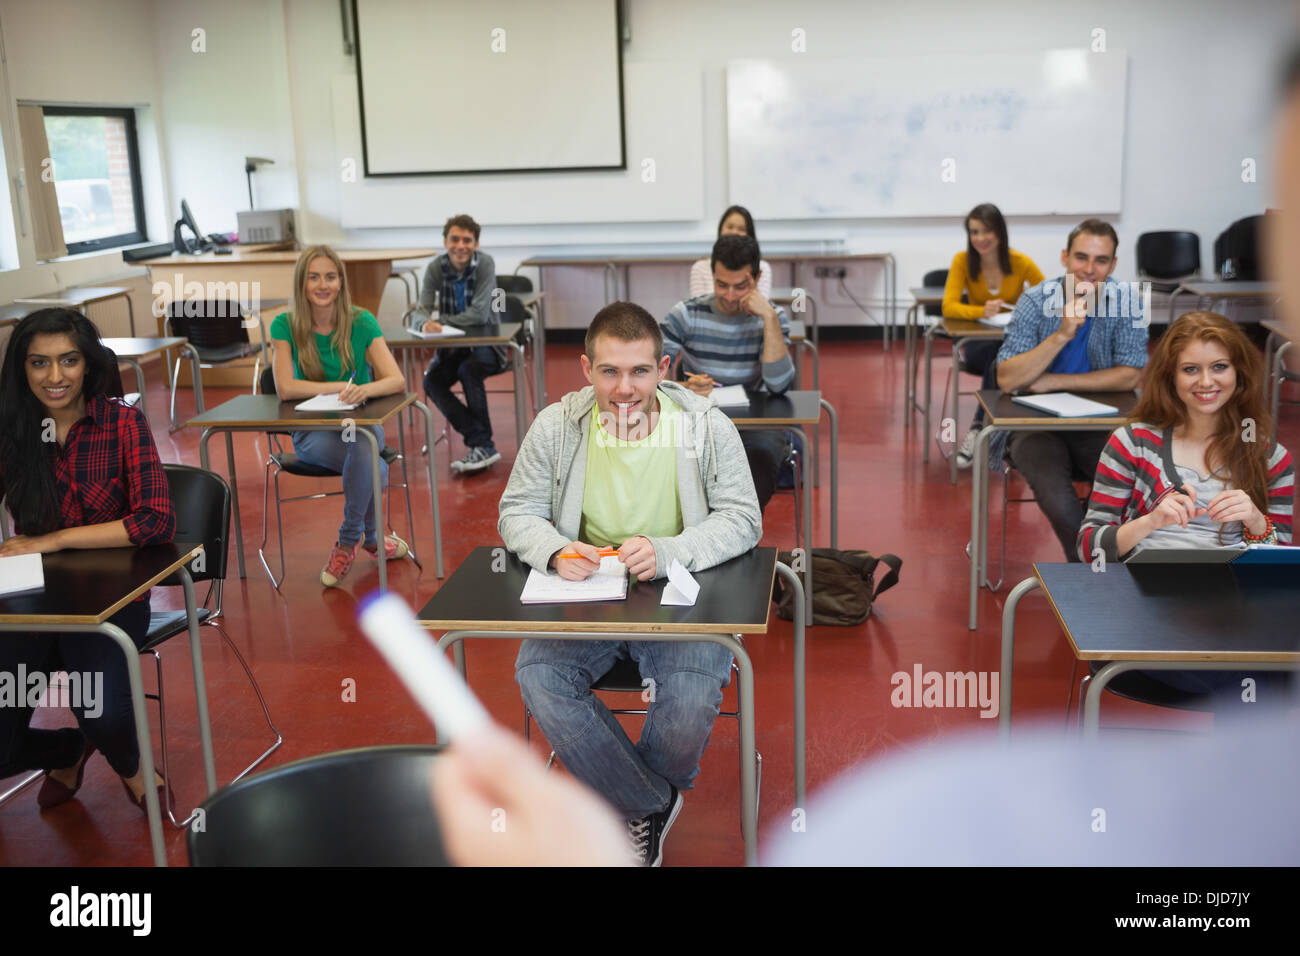 Students listening to their teacher in classroom Stock Photo